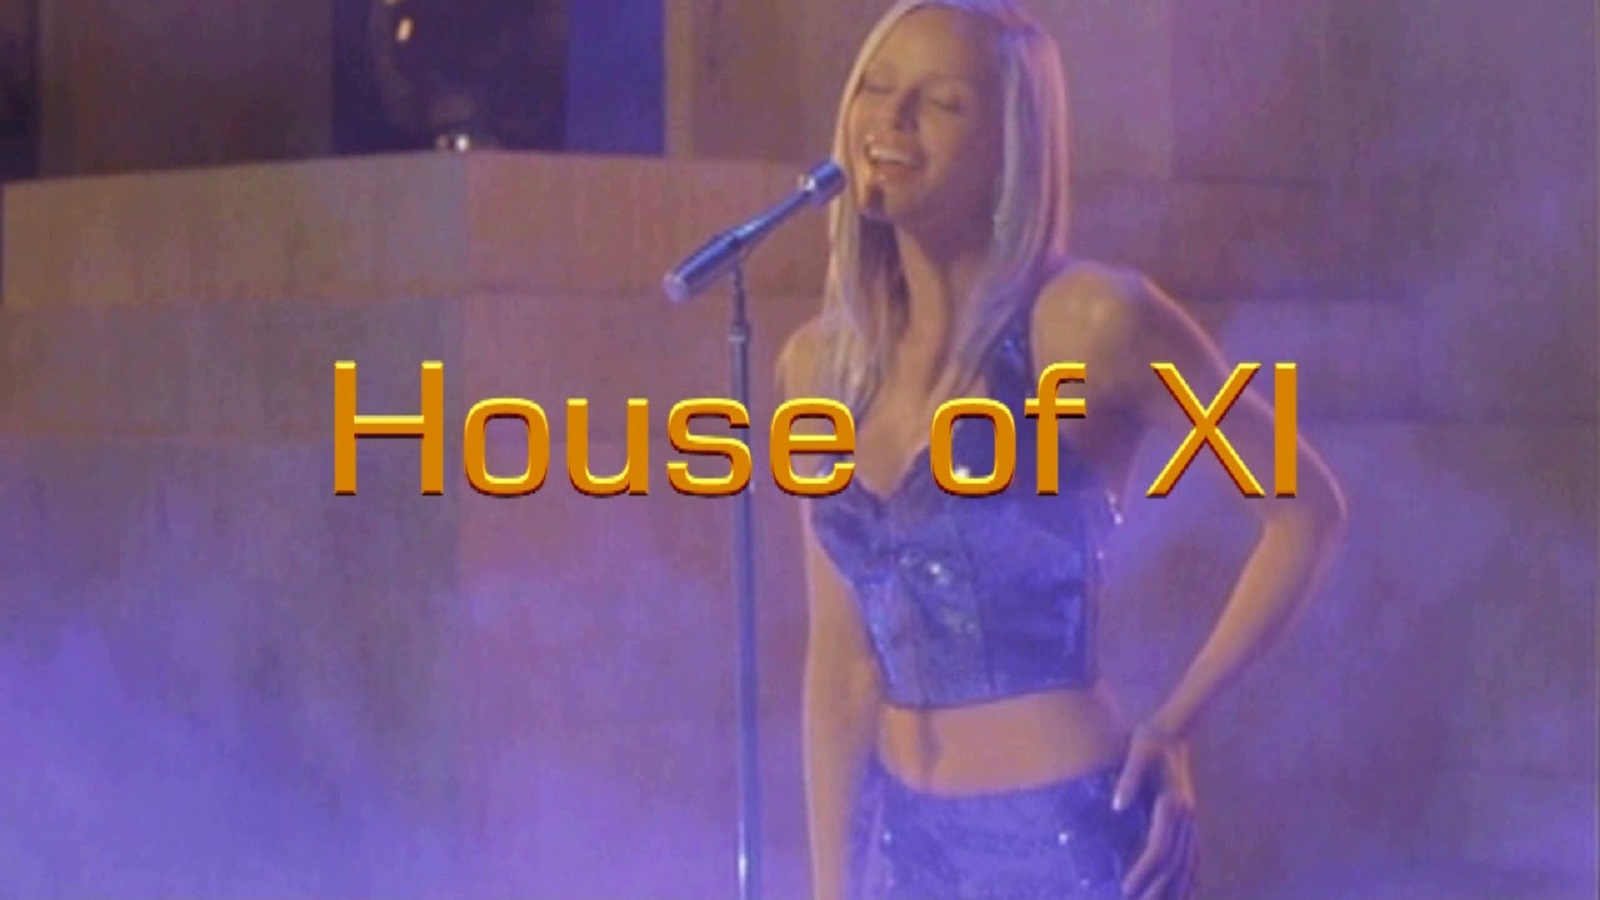 House of XI Style Video! Butt Naked!